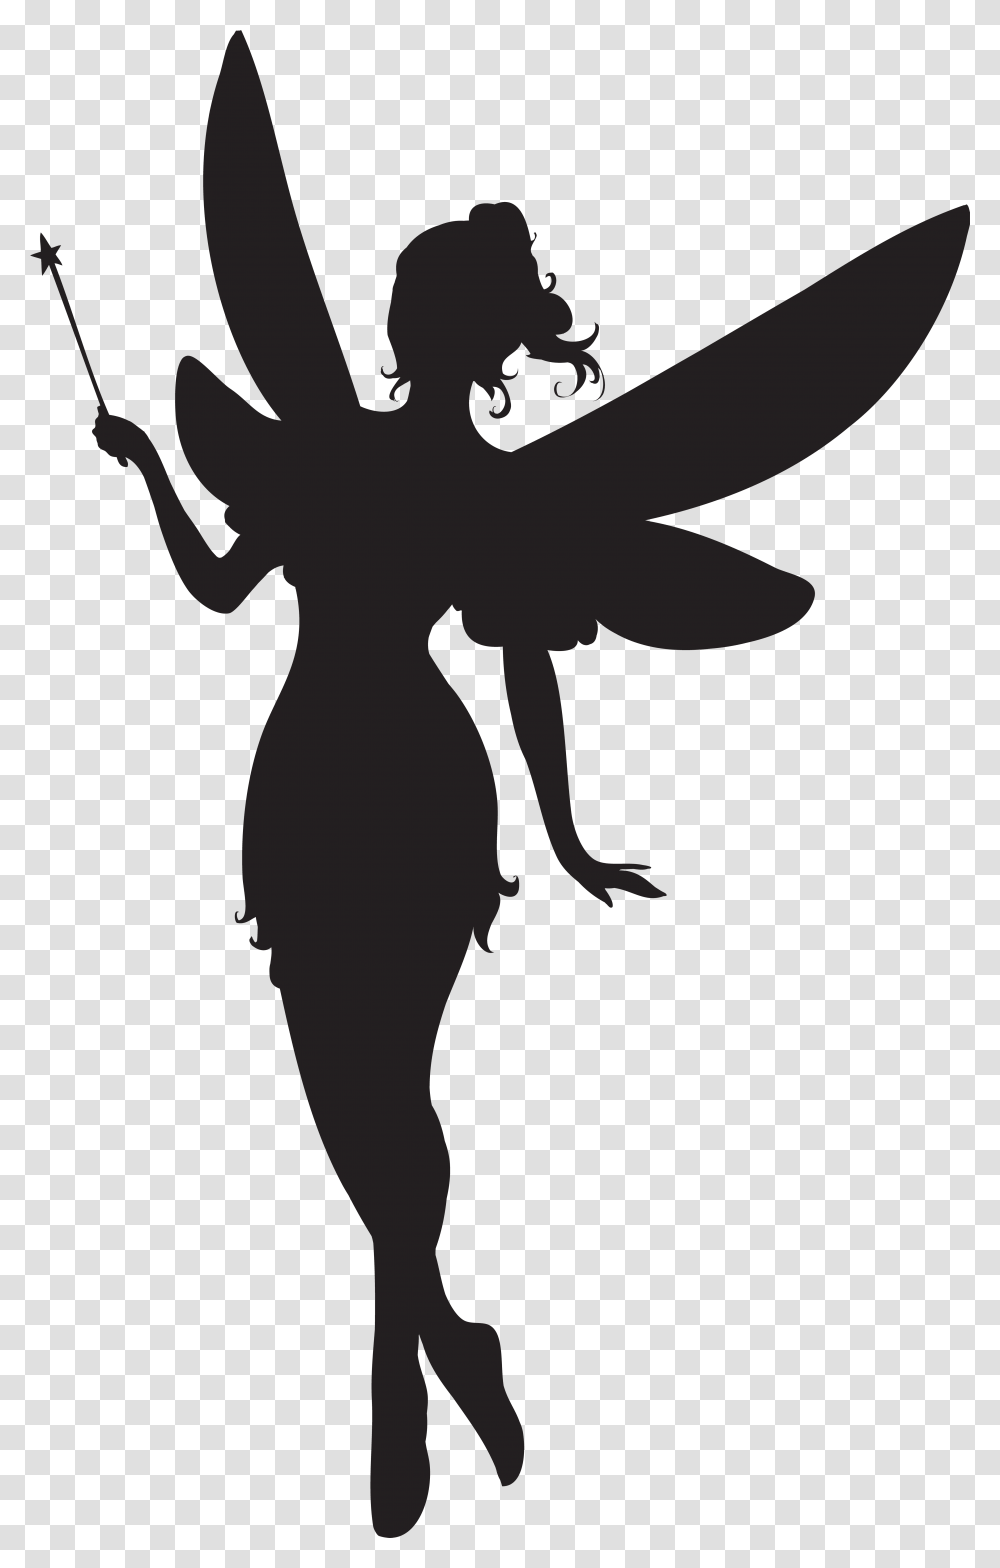 With Fairy Magic Silhouette Wand Free Download Fairy Silhouette, Person, Human, Stencil Transparent Png